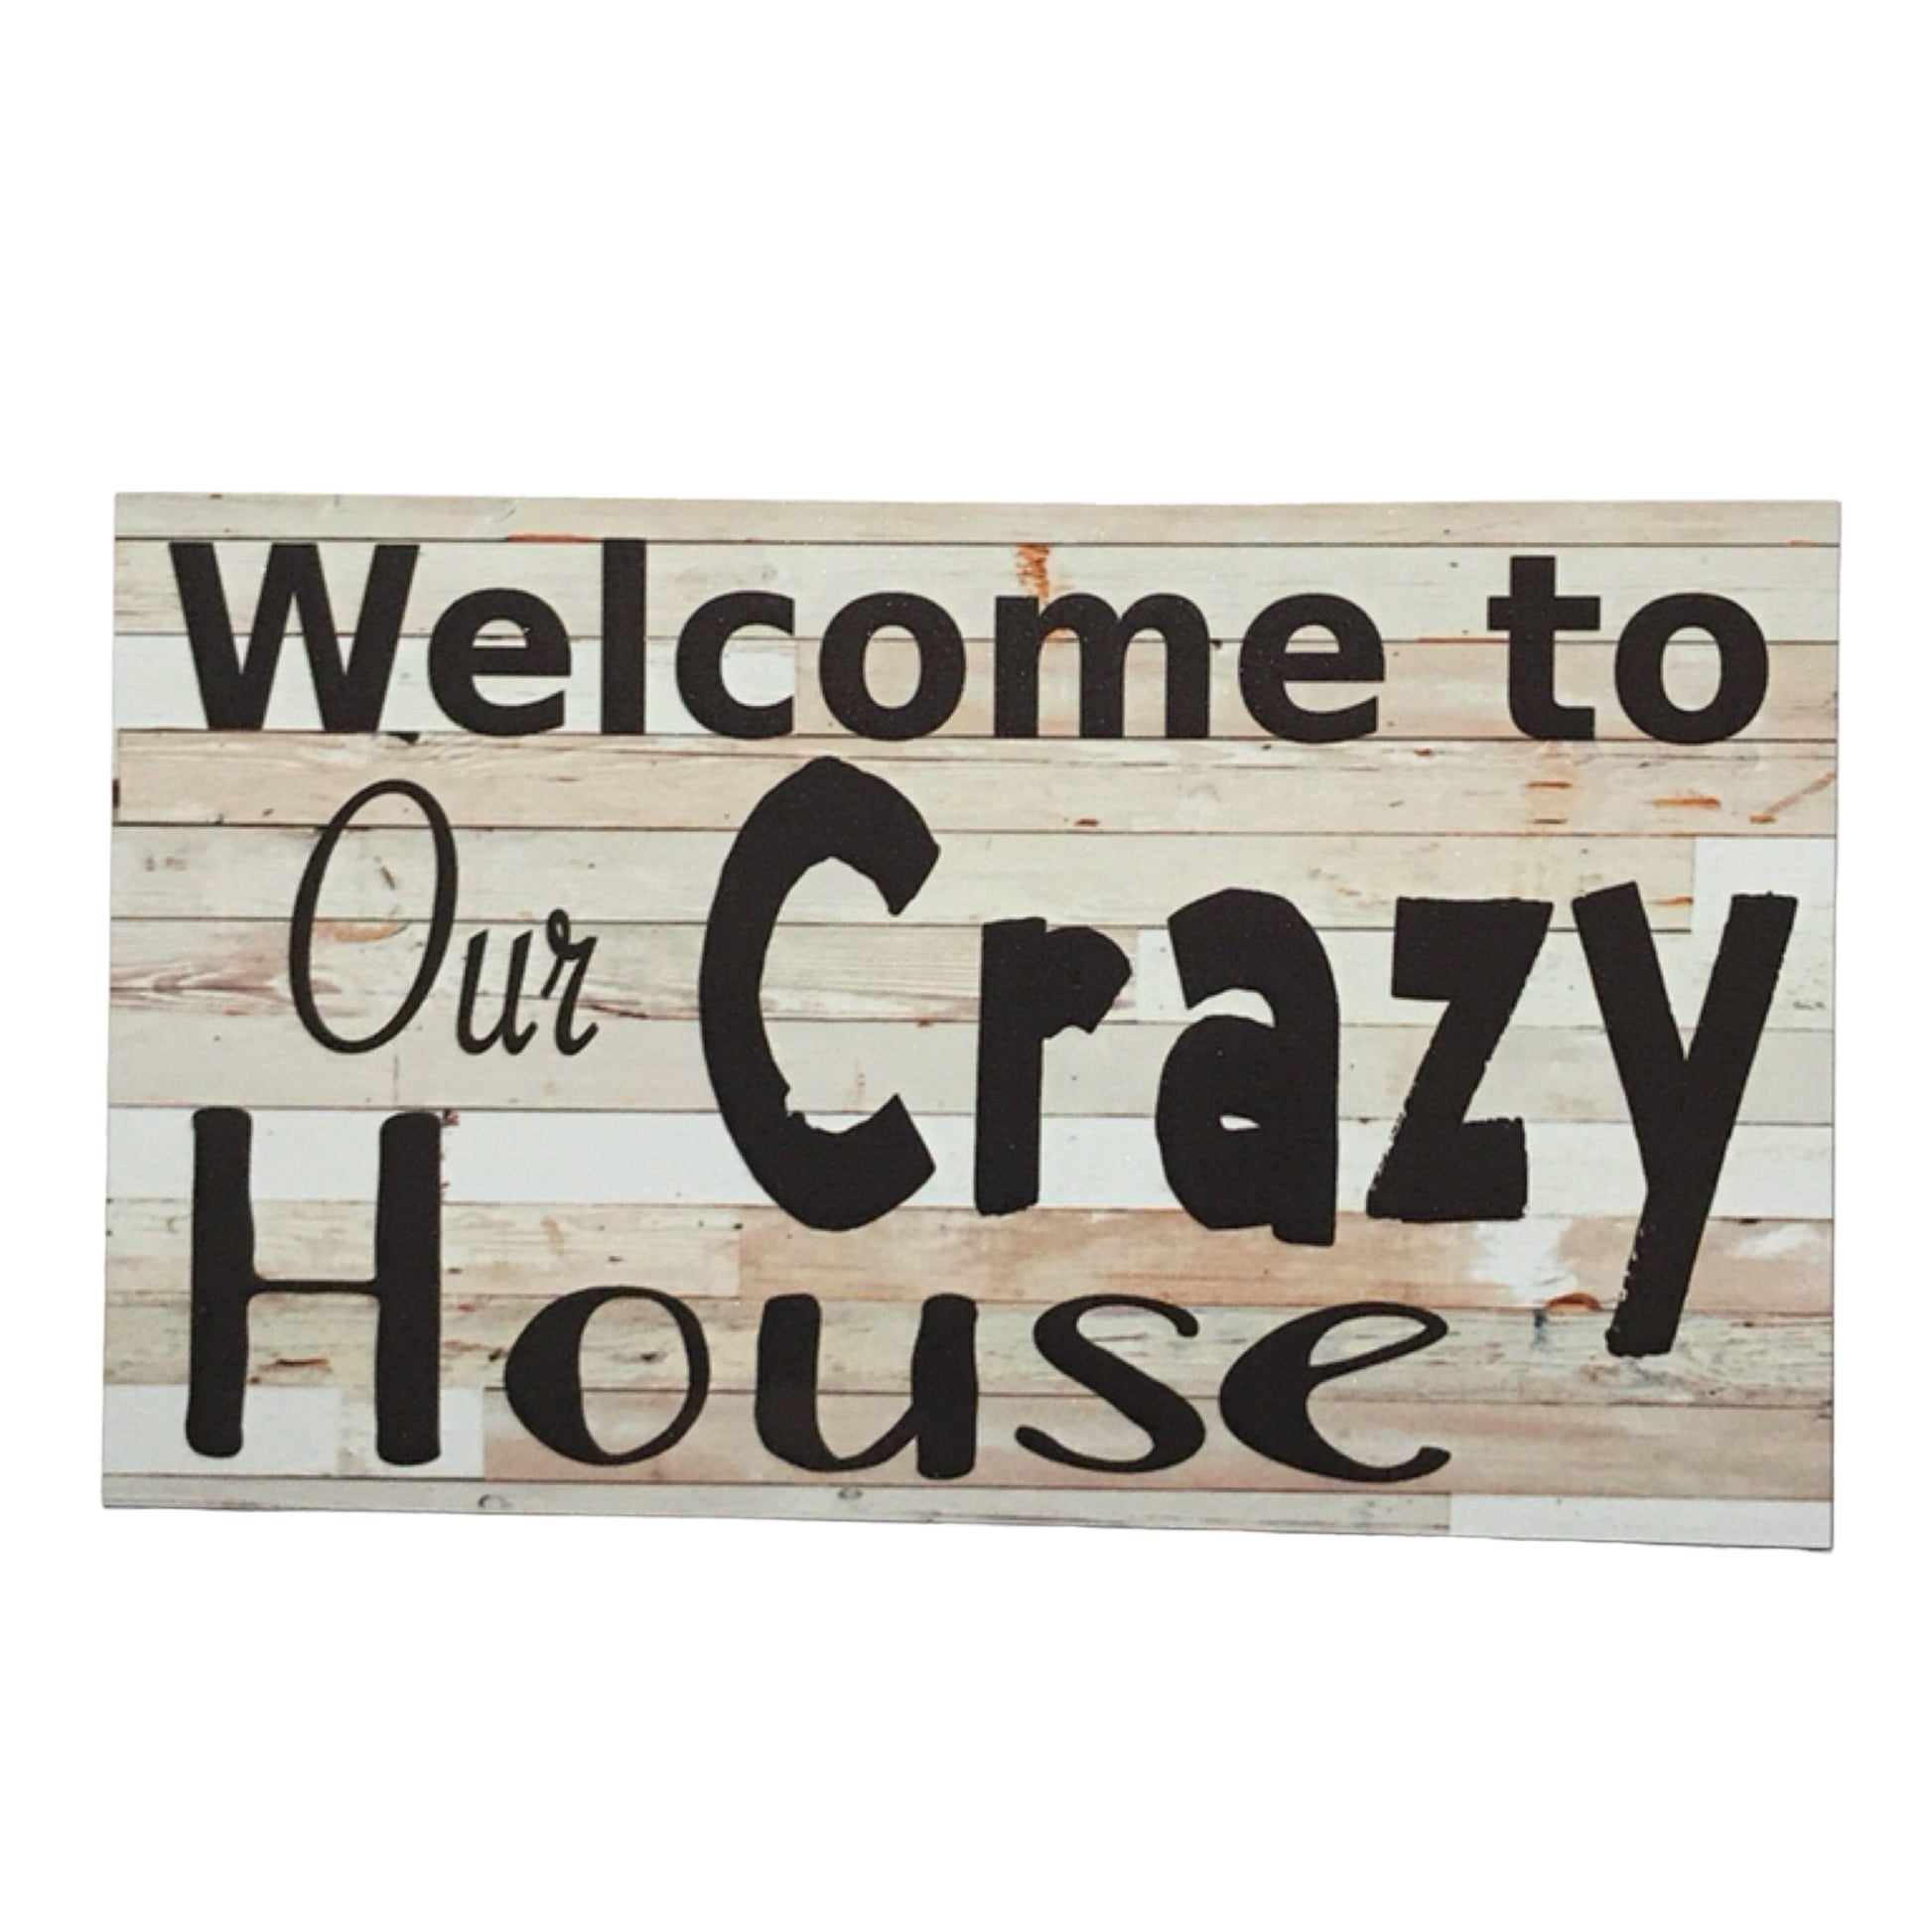 Welcome To Our Crazy House Sign - The Renmy Store Homewares & Gifts 